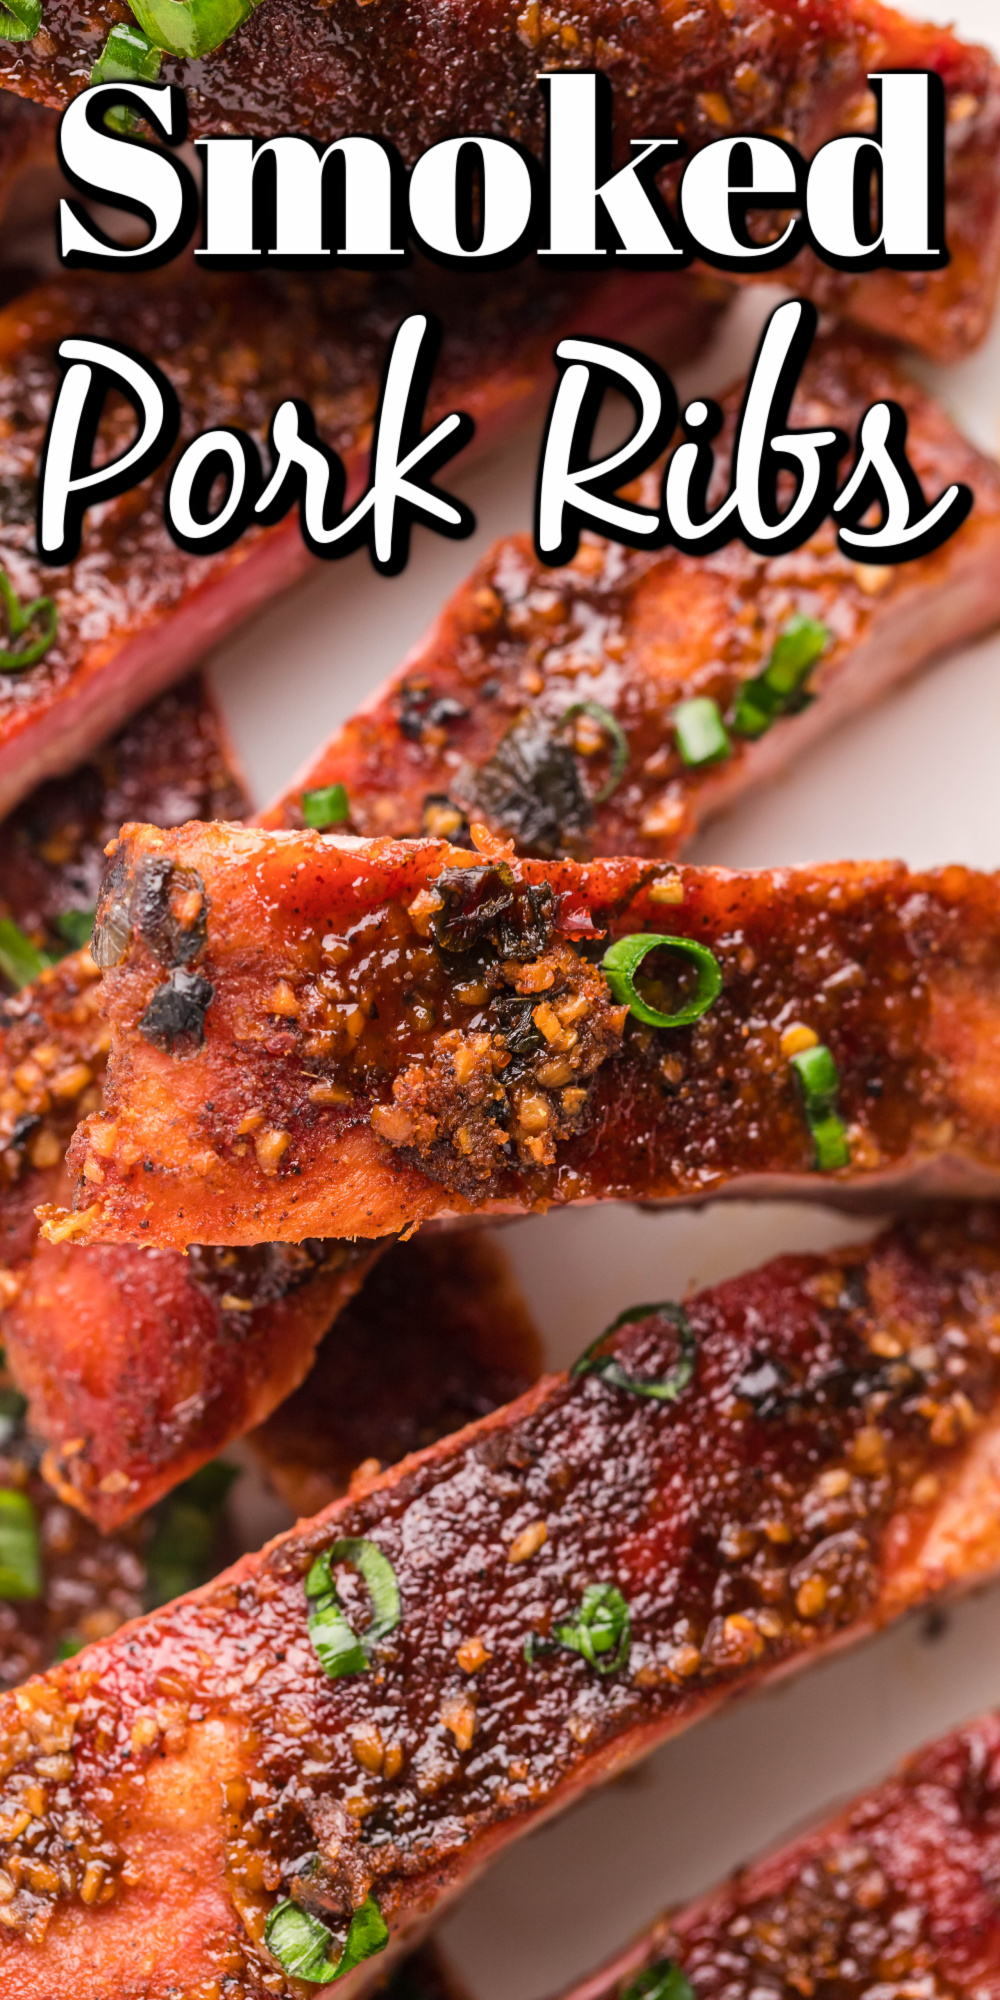 These smoked pork ribs cooked low and slow are tender, juicy and oh so flavorful!